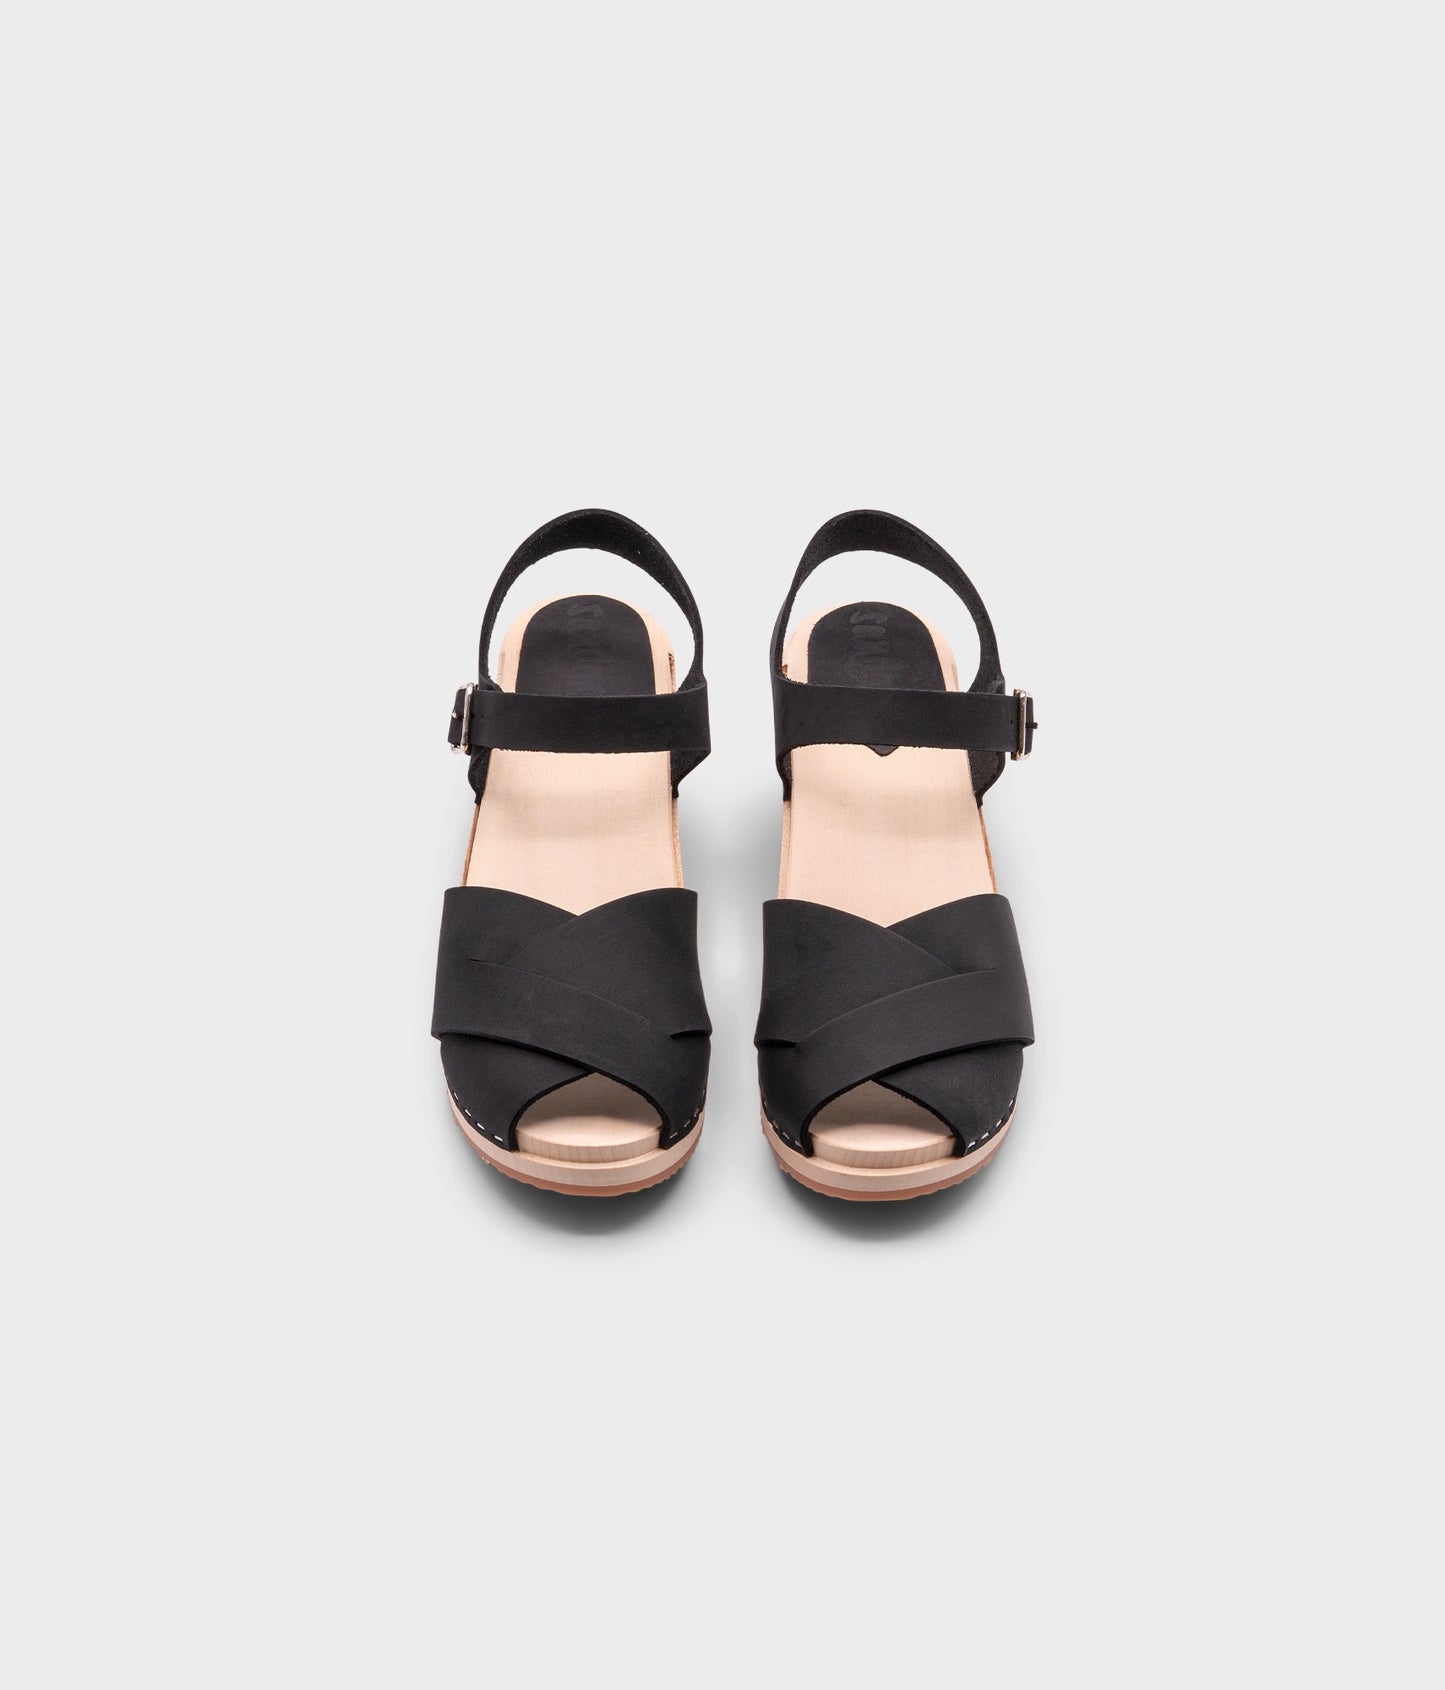 high heeled clog sandals in black nubuck leather with an open-toe stapled on a light wooden base